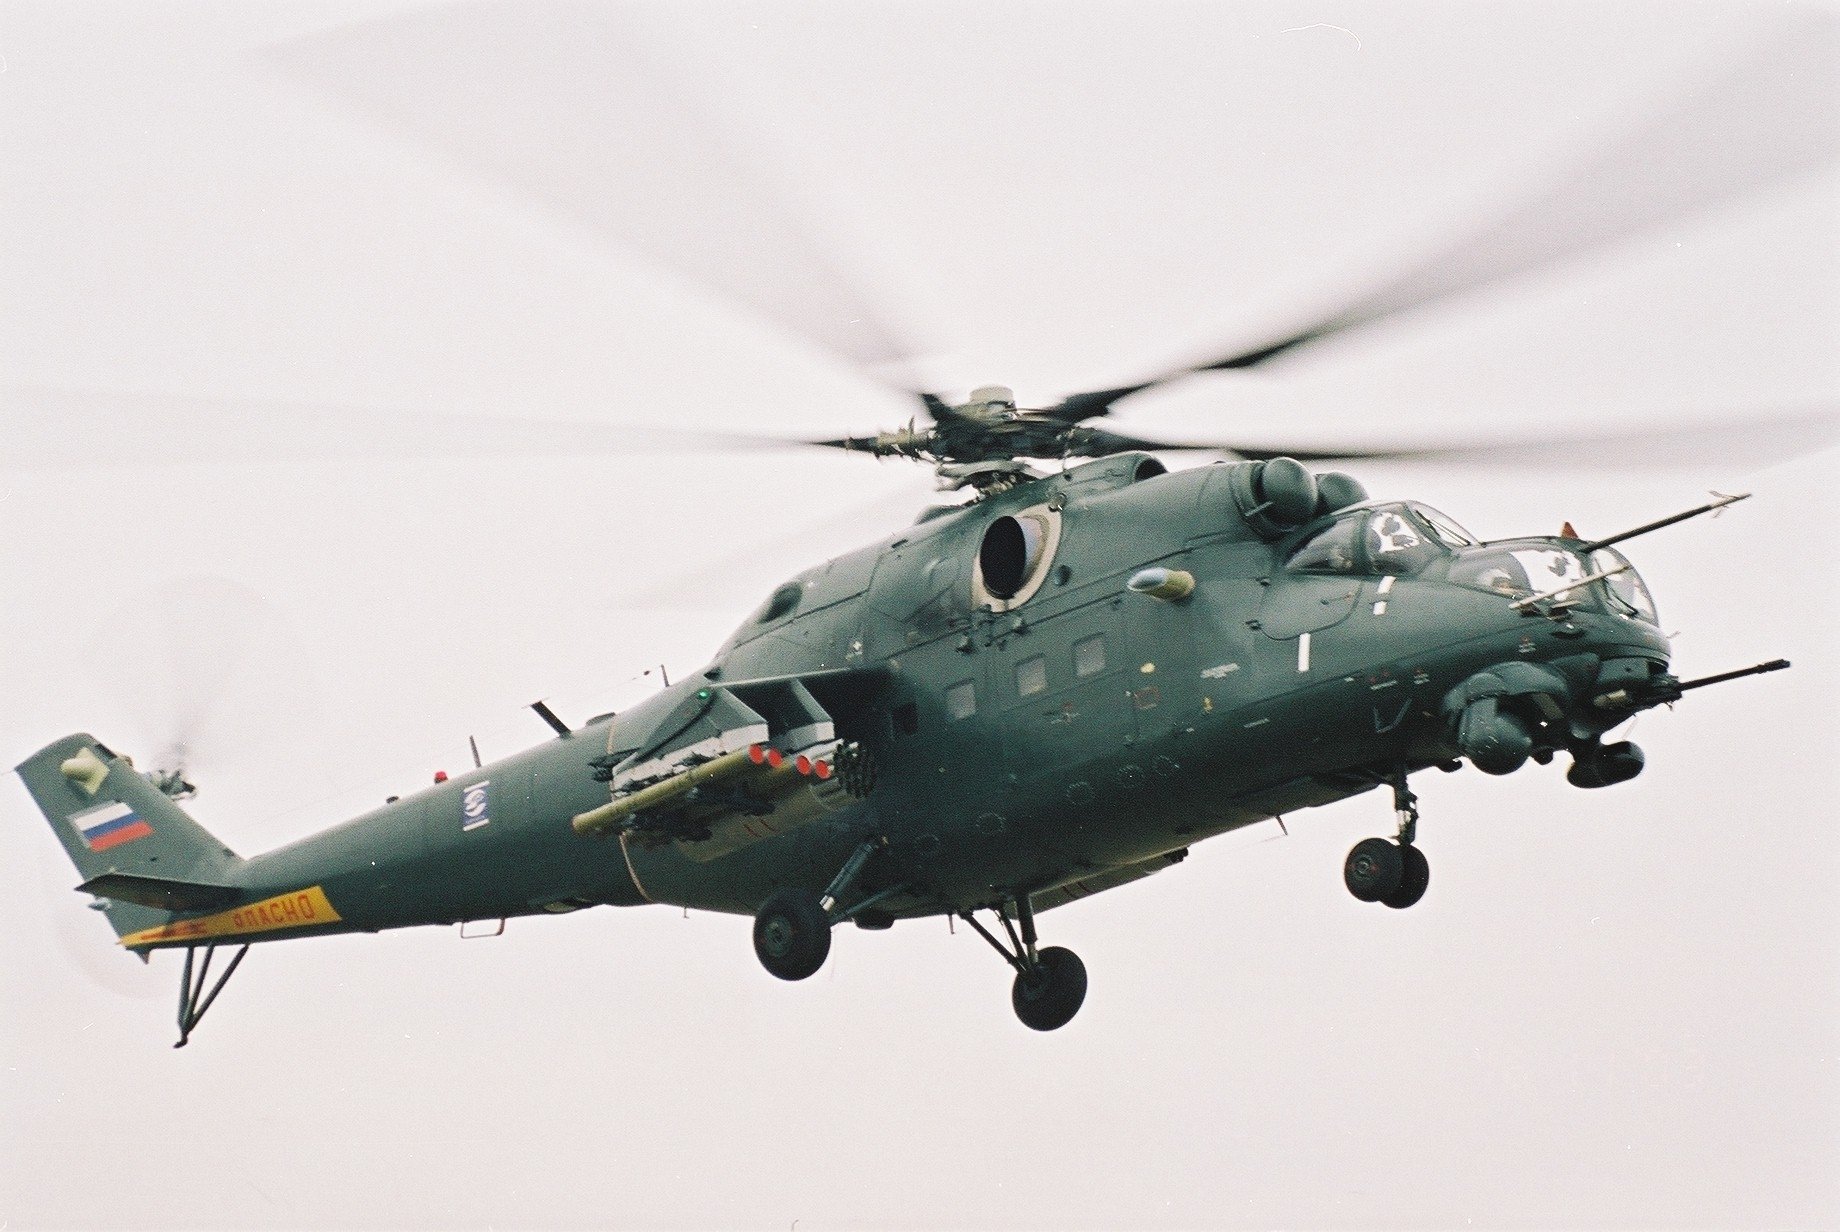 mi 24, Hind, Gunship, Russian, Russia, Military, Weapon, Helicopter, Aircraft,  52 Wallpaper